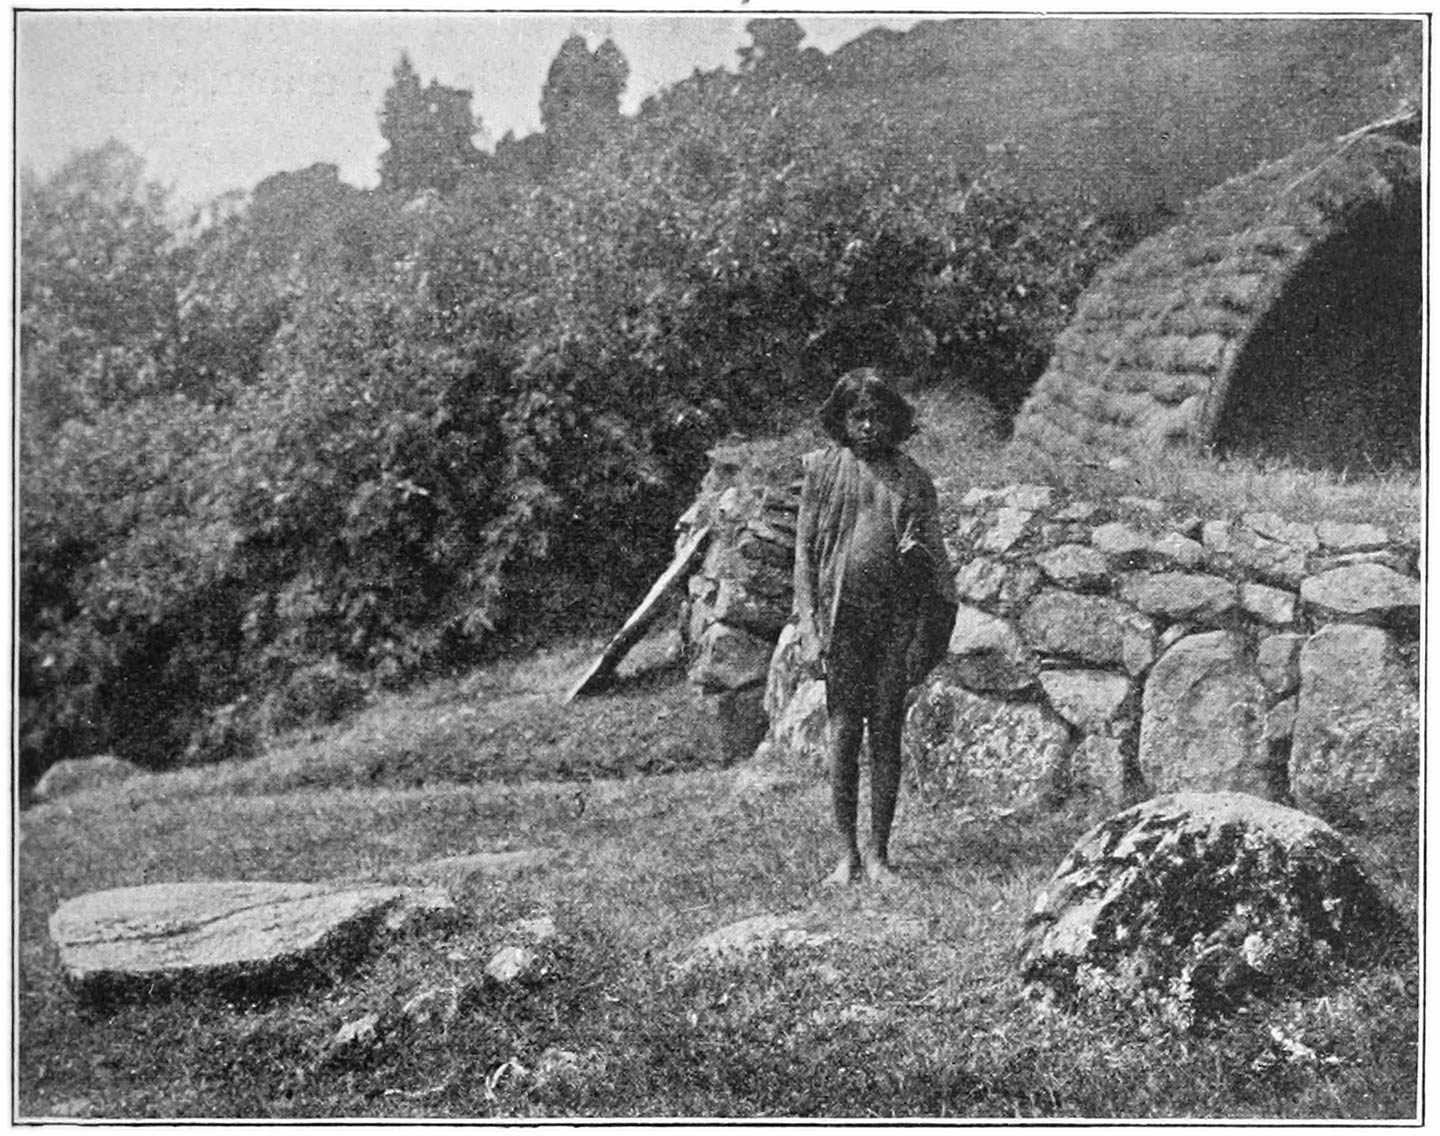 FIG. 23.—THE ‘WURSOL’ OF KARS, KERNPISI (56), STANDING BY THE SIDE OF HIS DAIRY.